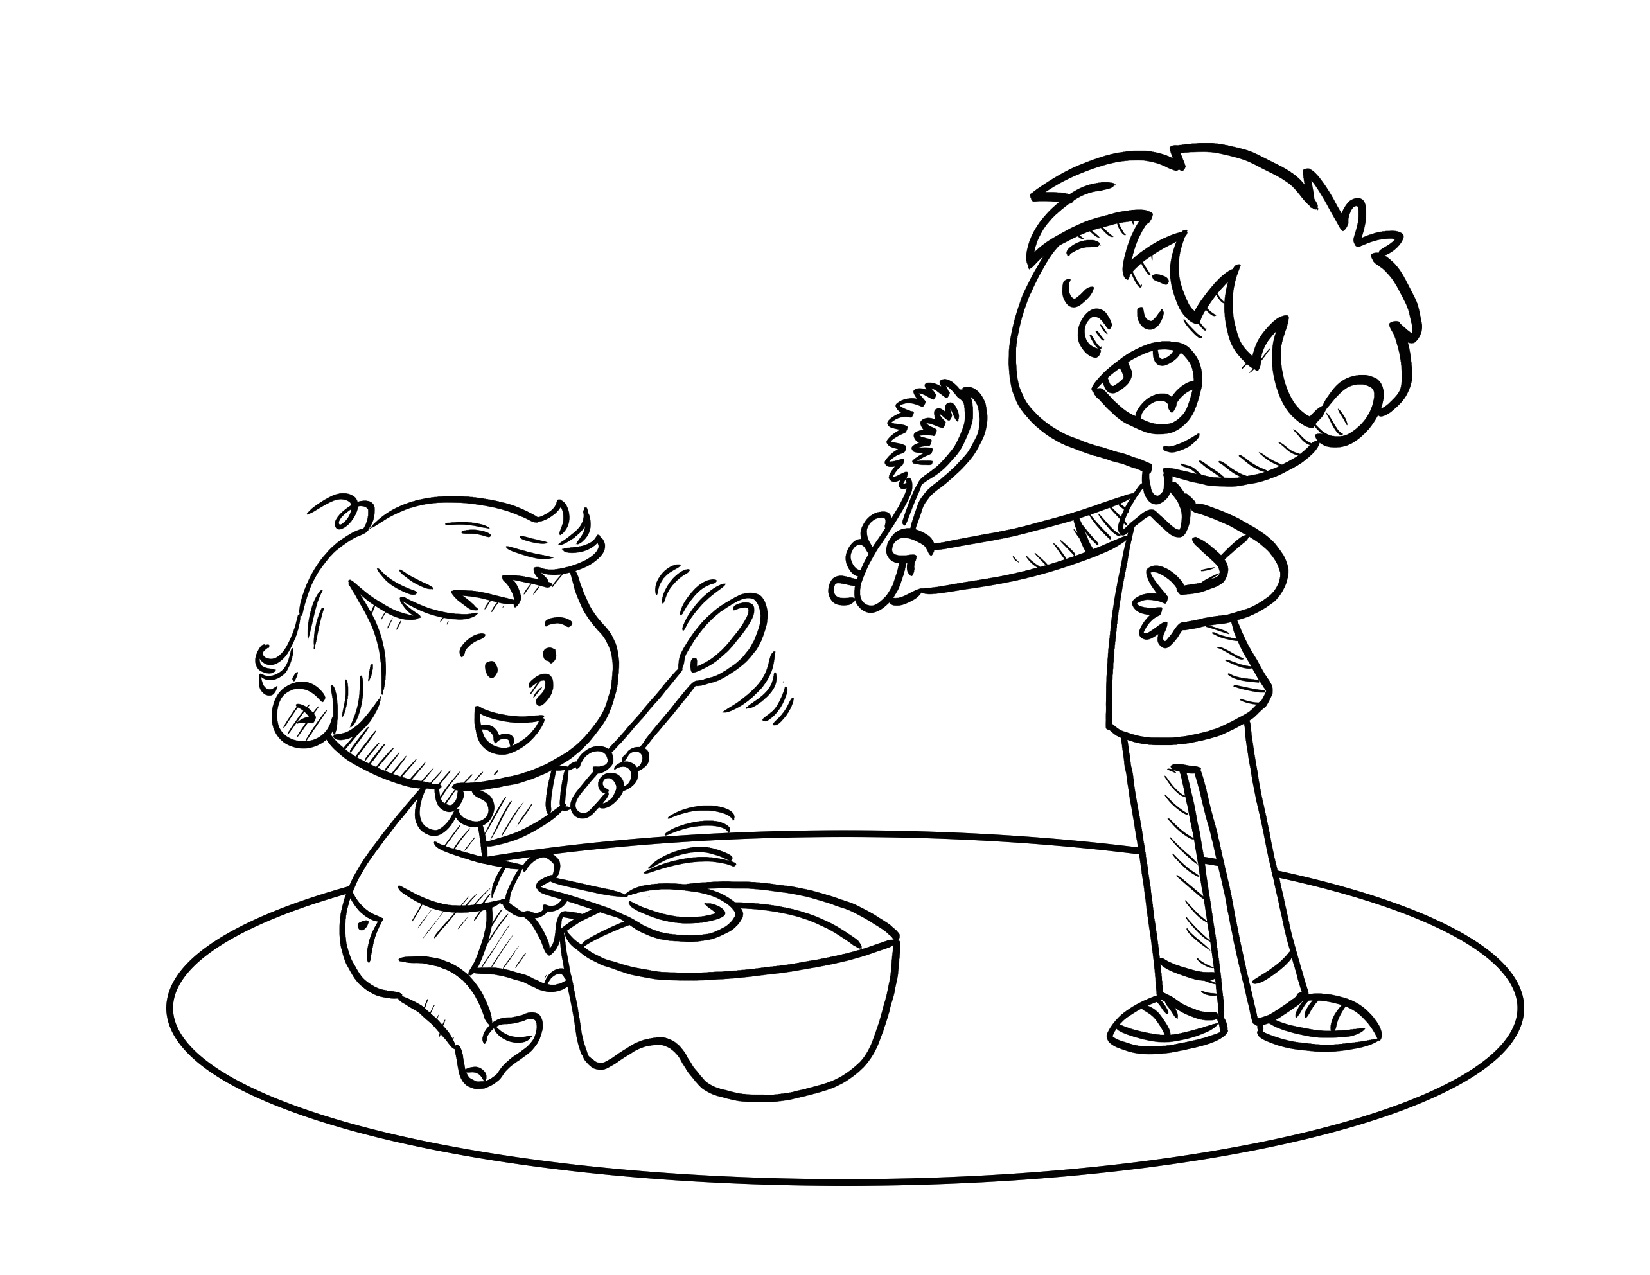 Kids banging on pots and pans coloring page